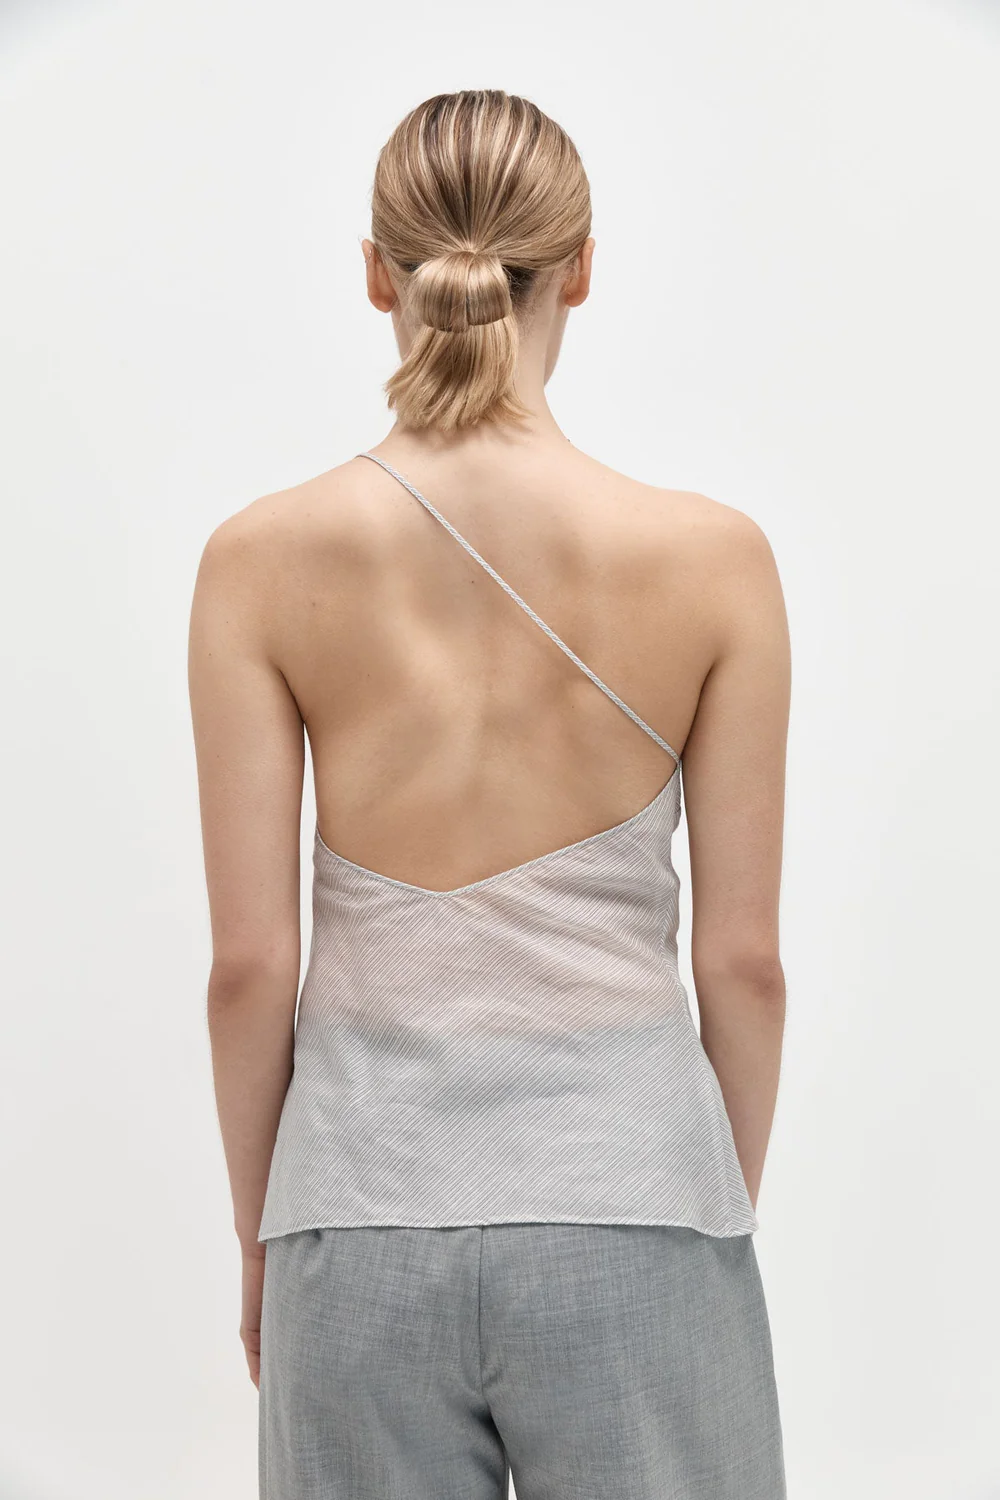 Product Image for Asymmetric One Shoulder Top, Sheer Stripe